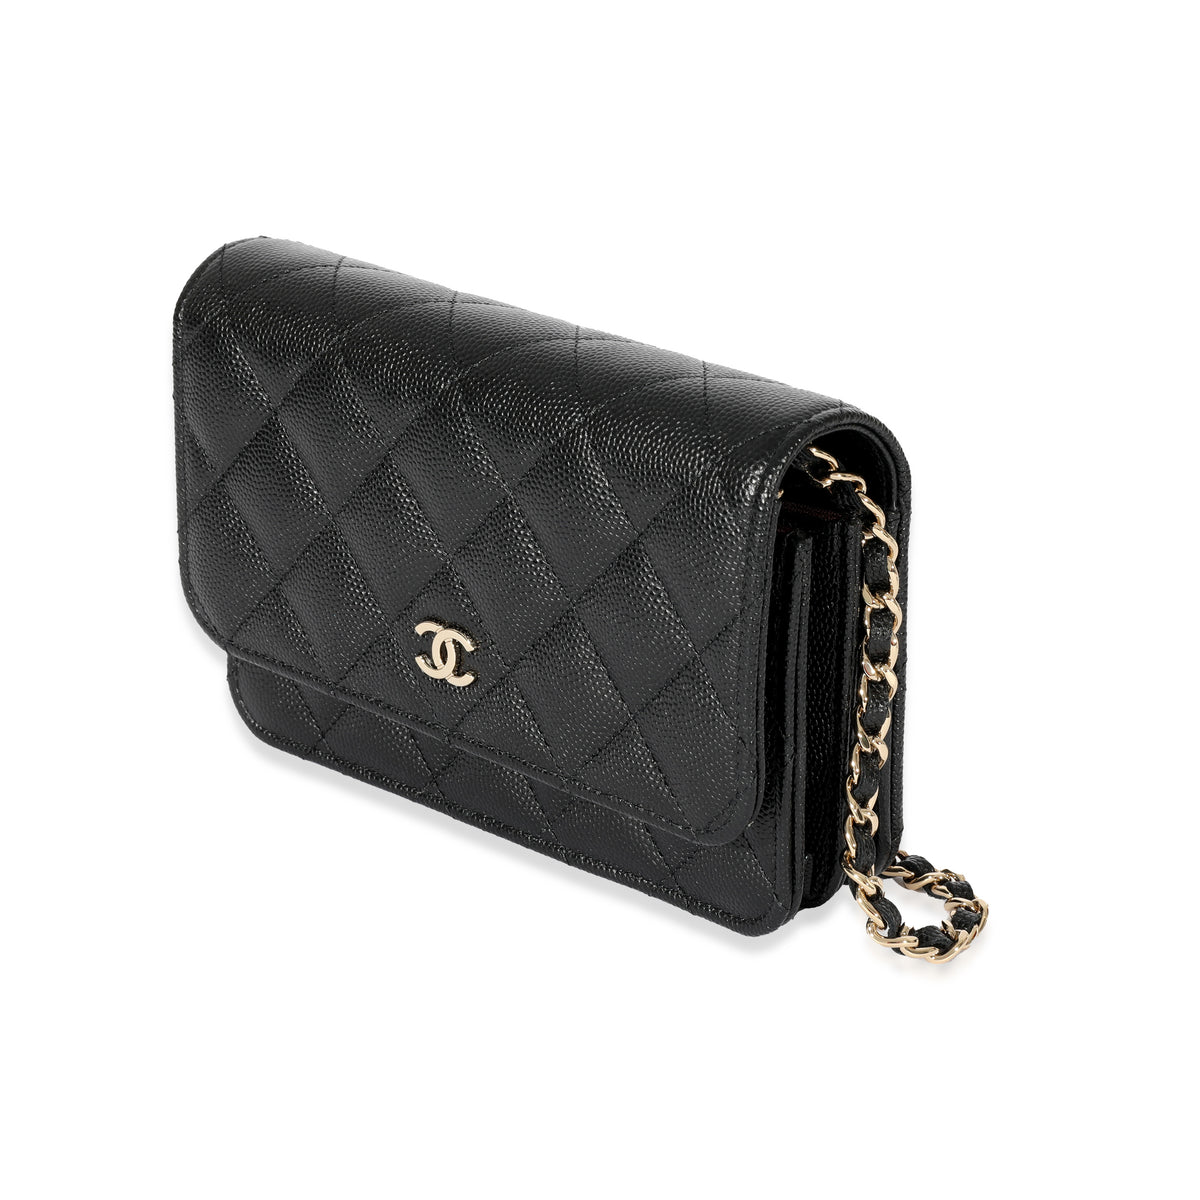 chanel black bag with pearls